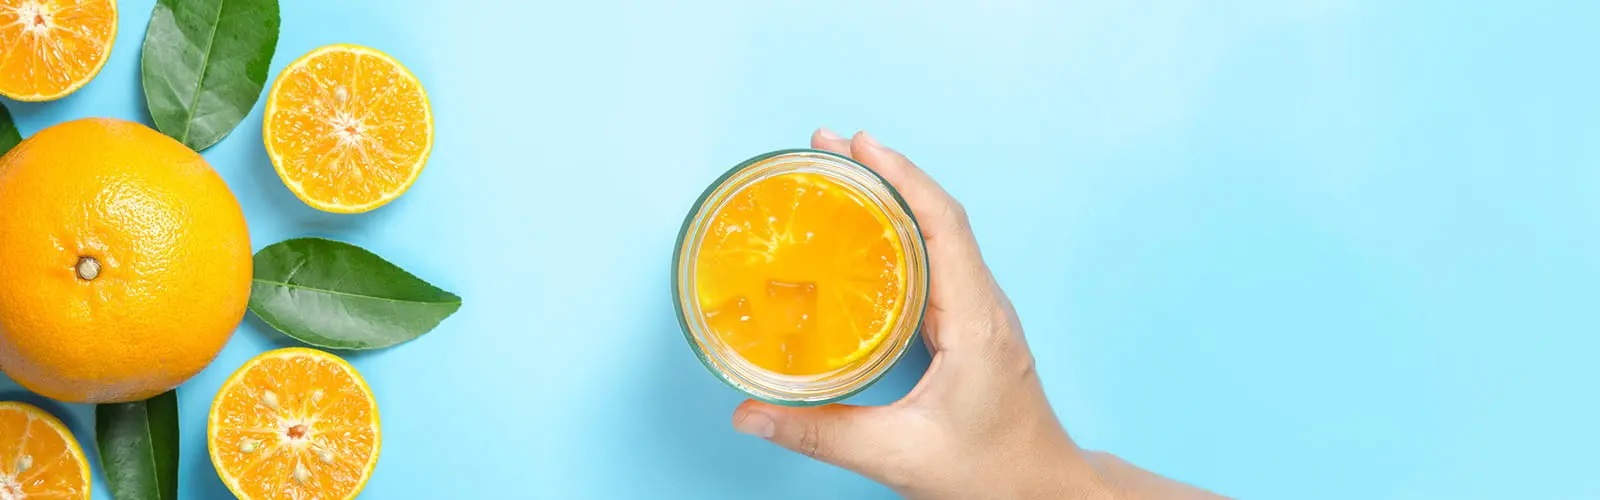 Top view of an orange, two oranges cut in half, and a hand holding a glass of orange juice with ice on a light blue surface